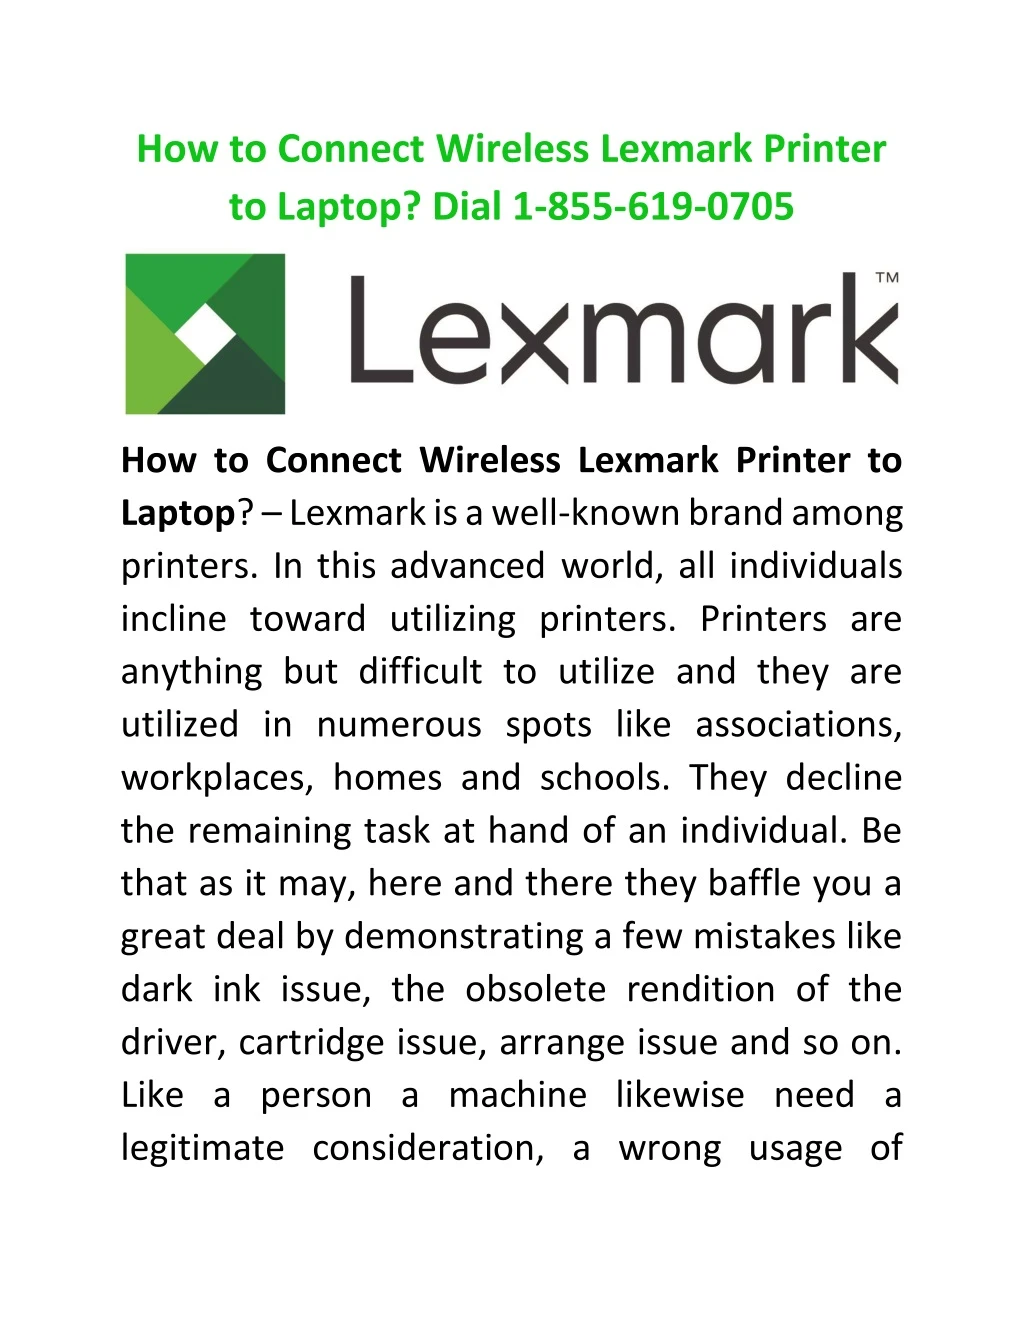 how to connect wireless lexmark printer to laptop